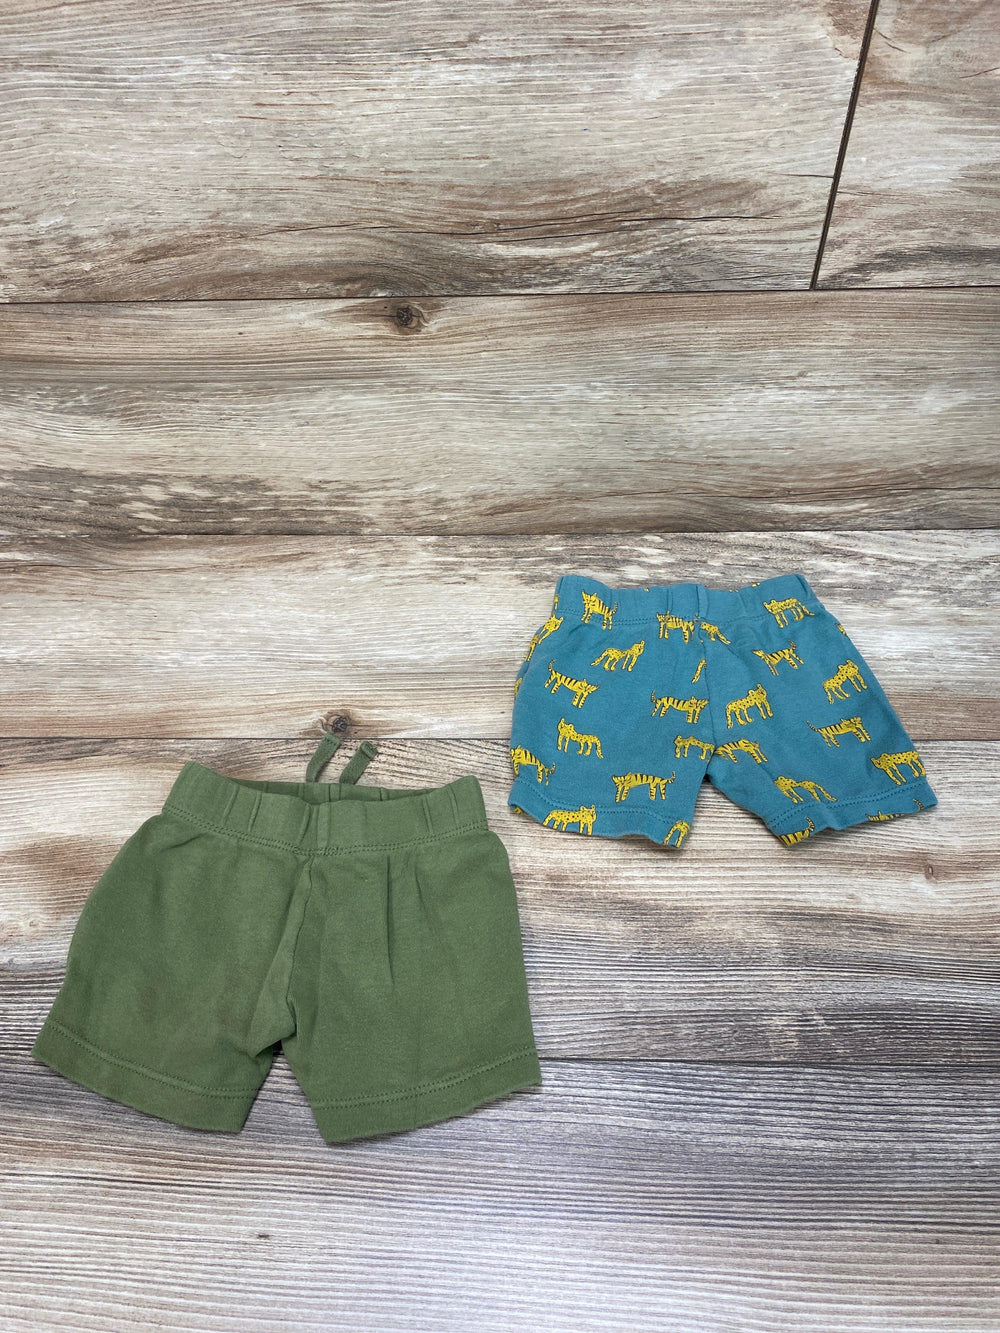 Amazon Essentials 2Pk Blue/Green Cotton Shorts sz 6m - Me 'n Mommy To Be